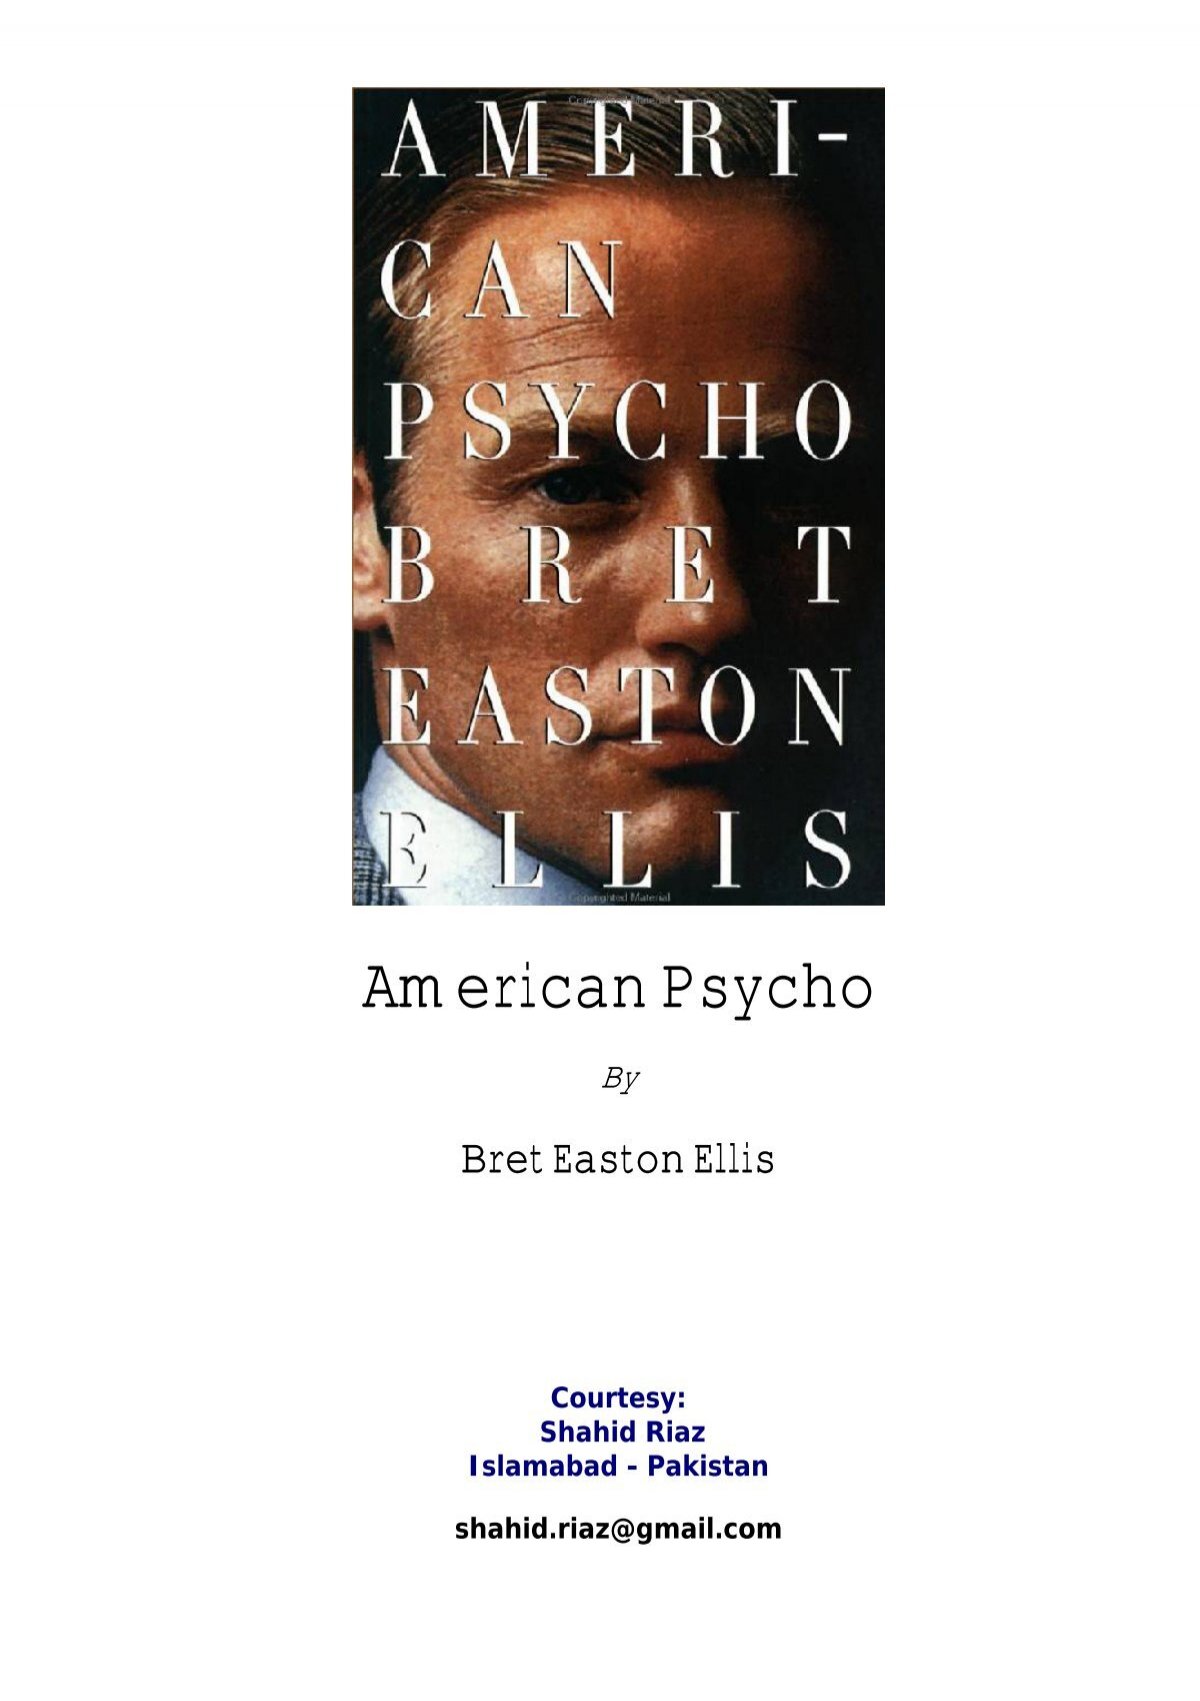 Daniel Lee Is the Face of a Company and Bret Easton Ellis Has